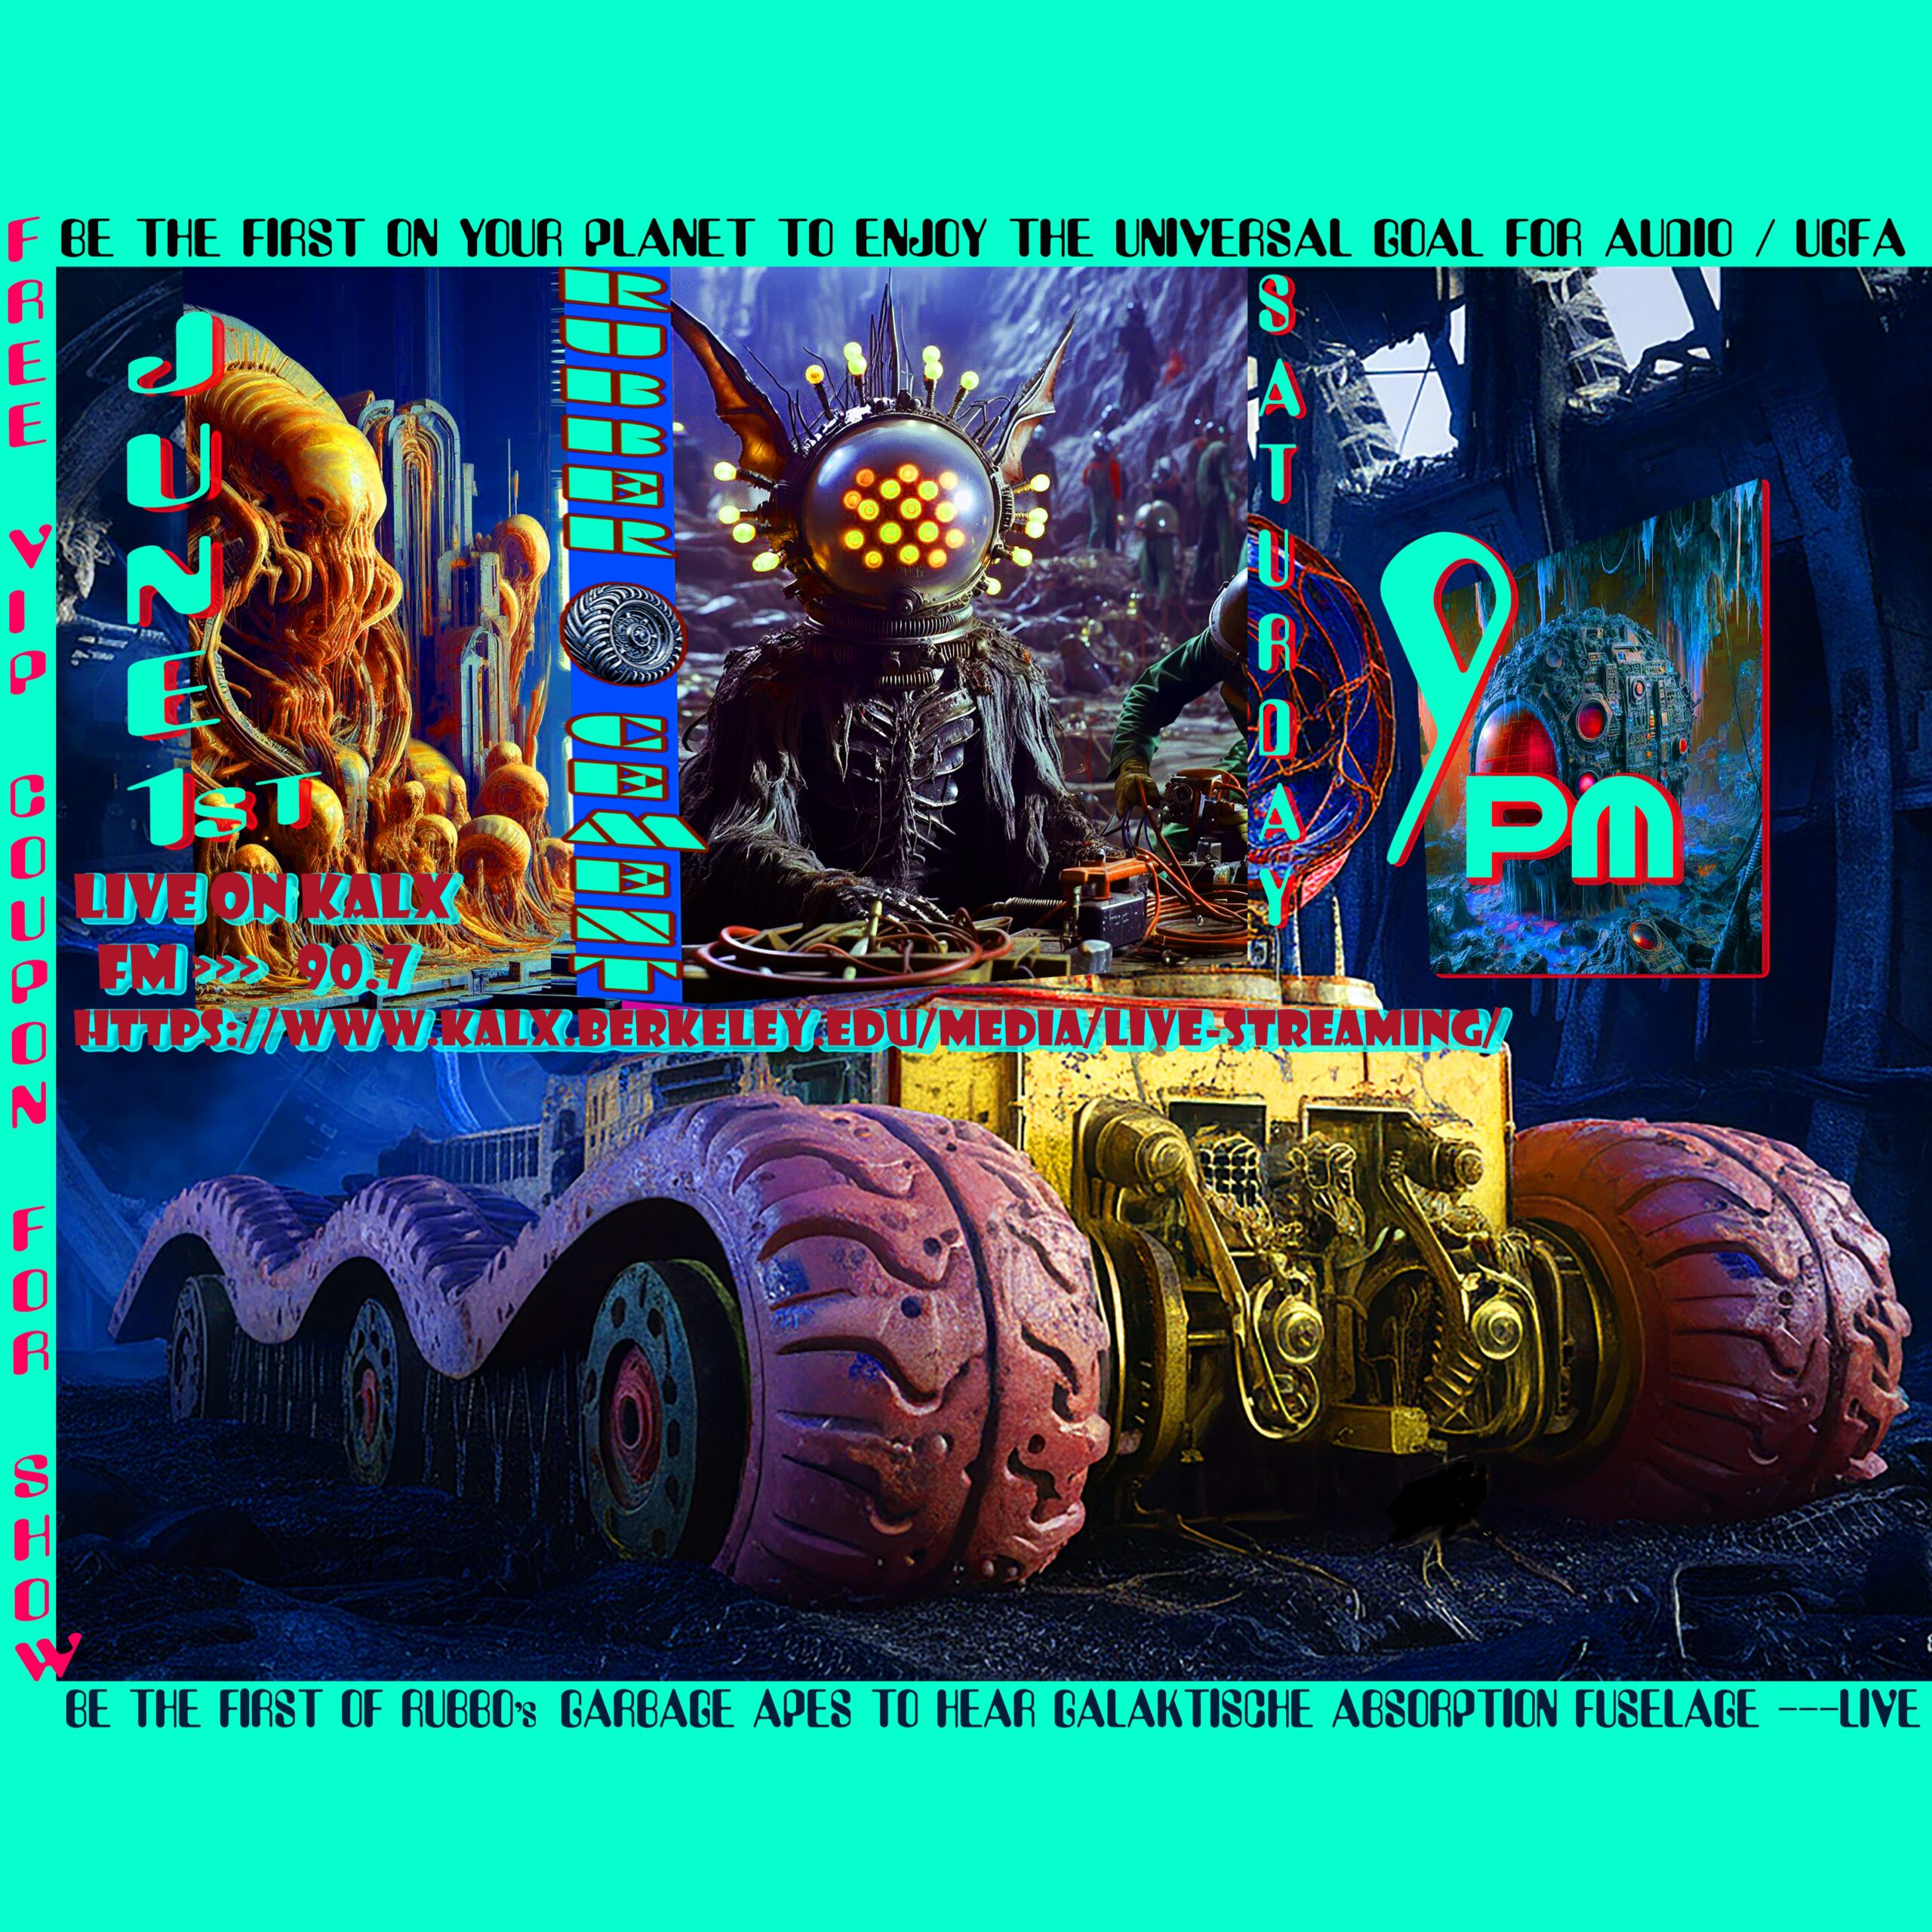 Sci-fi inspired collage of stylized aliens and space vehicles.